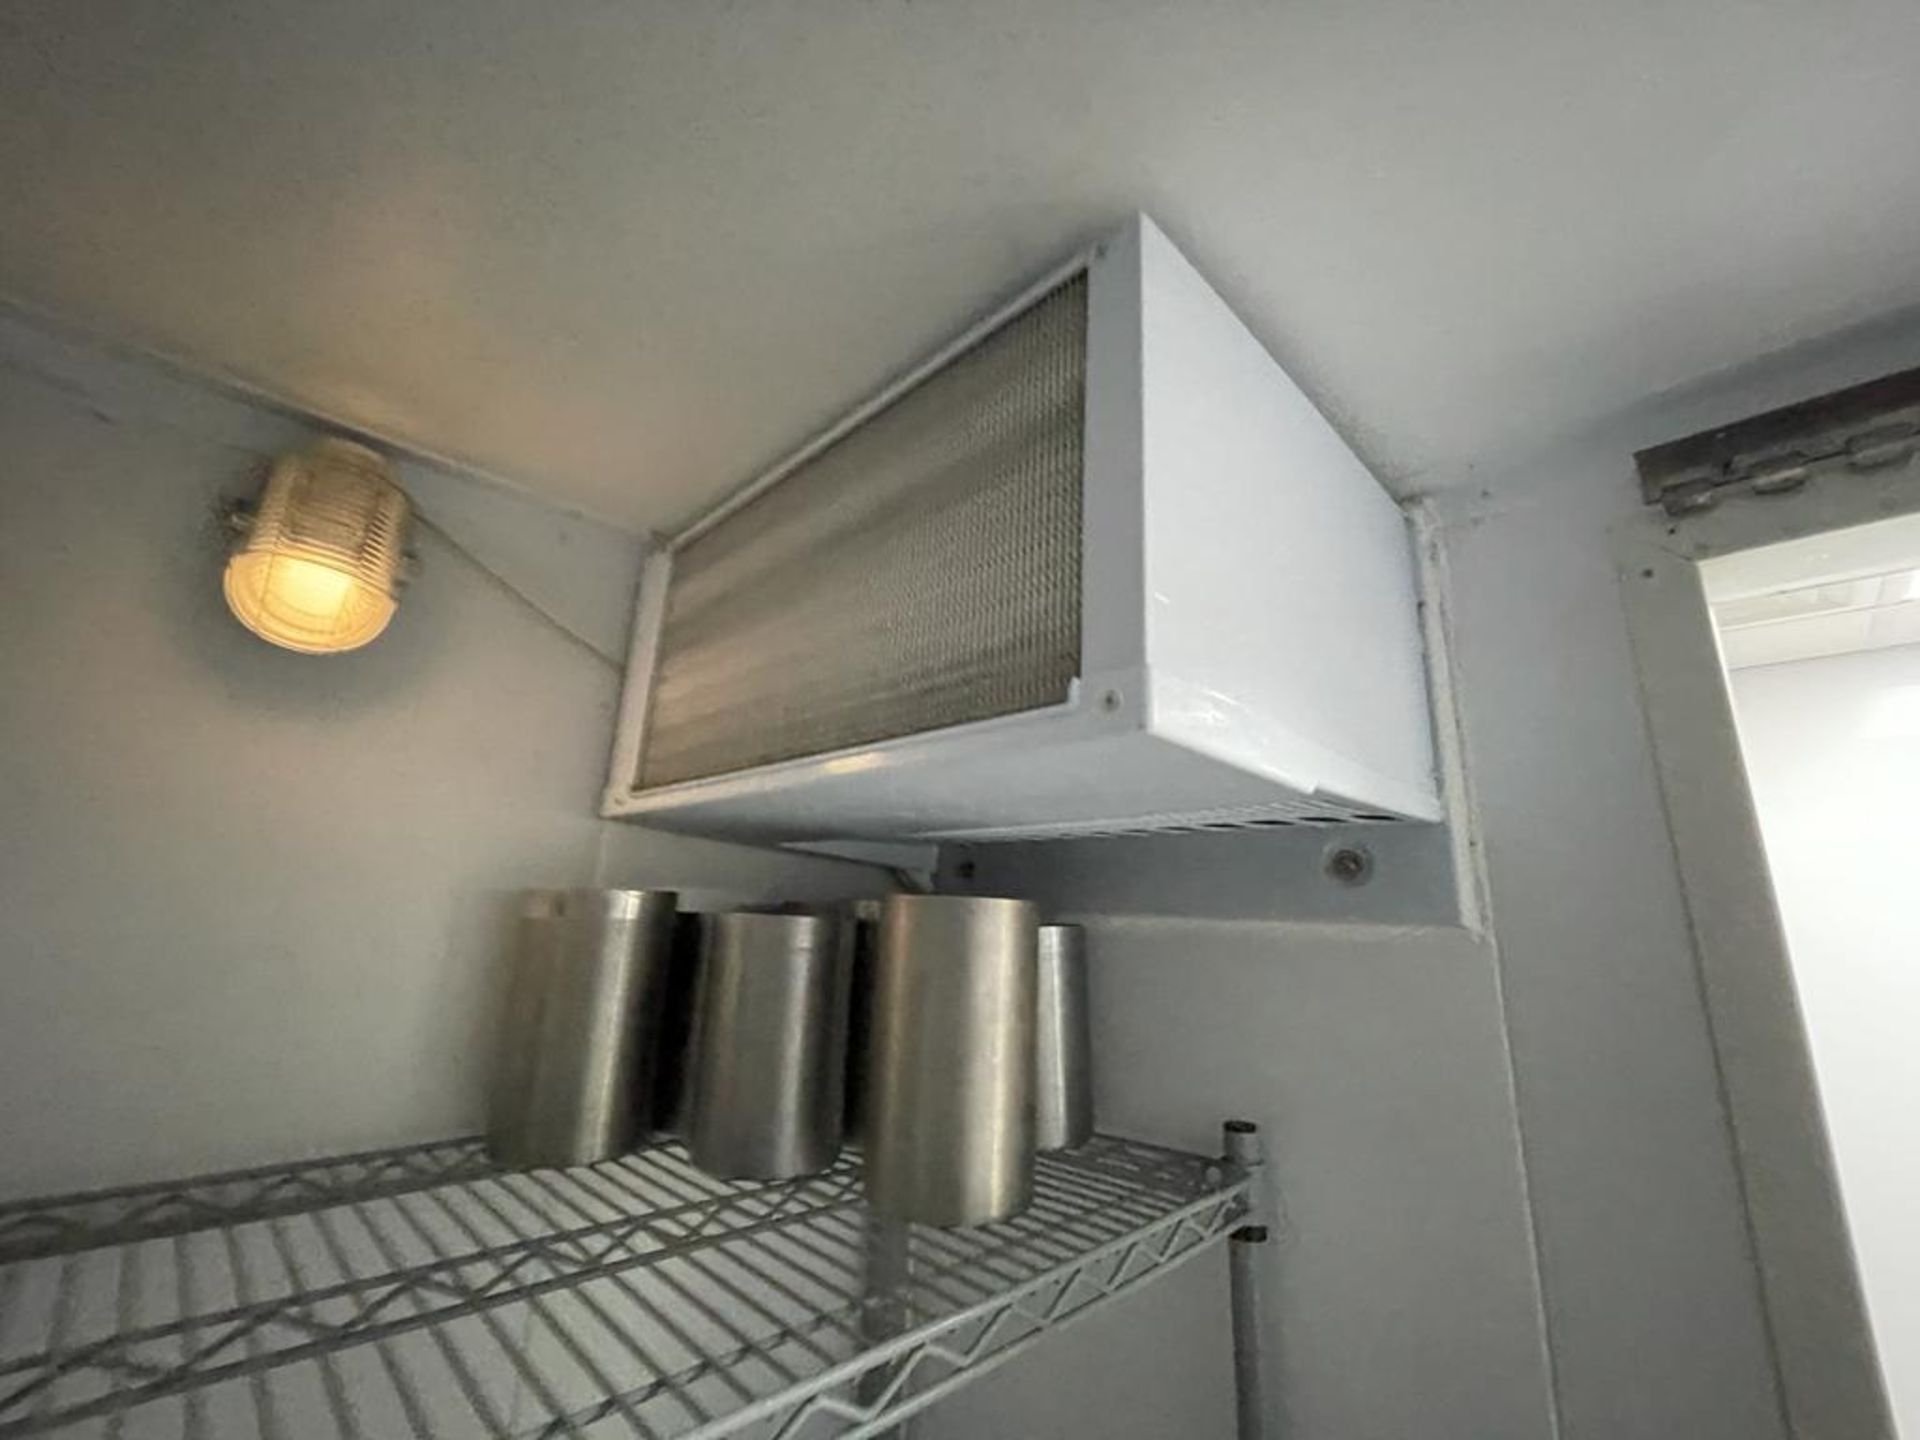 1 x Walk In Refrigerated Cold and Freezer With Zanotti Control Units - Ref: BK249 - CL686 - - Image 19 of 24